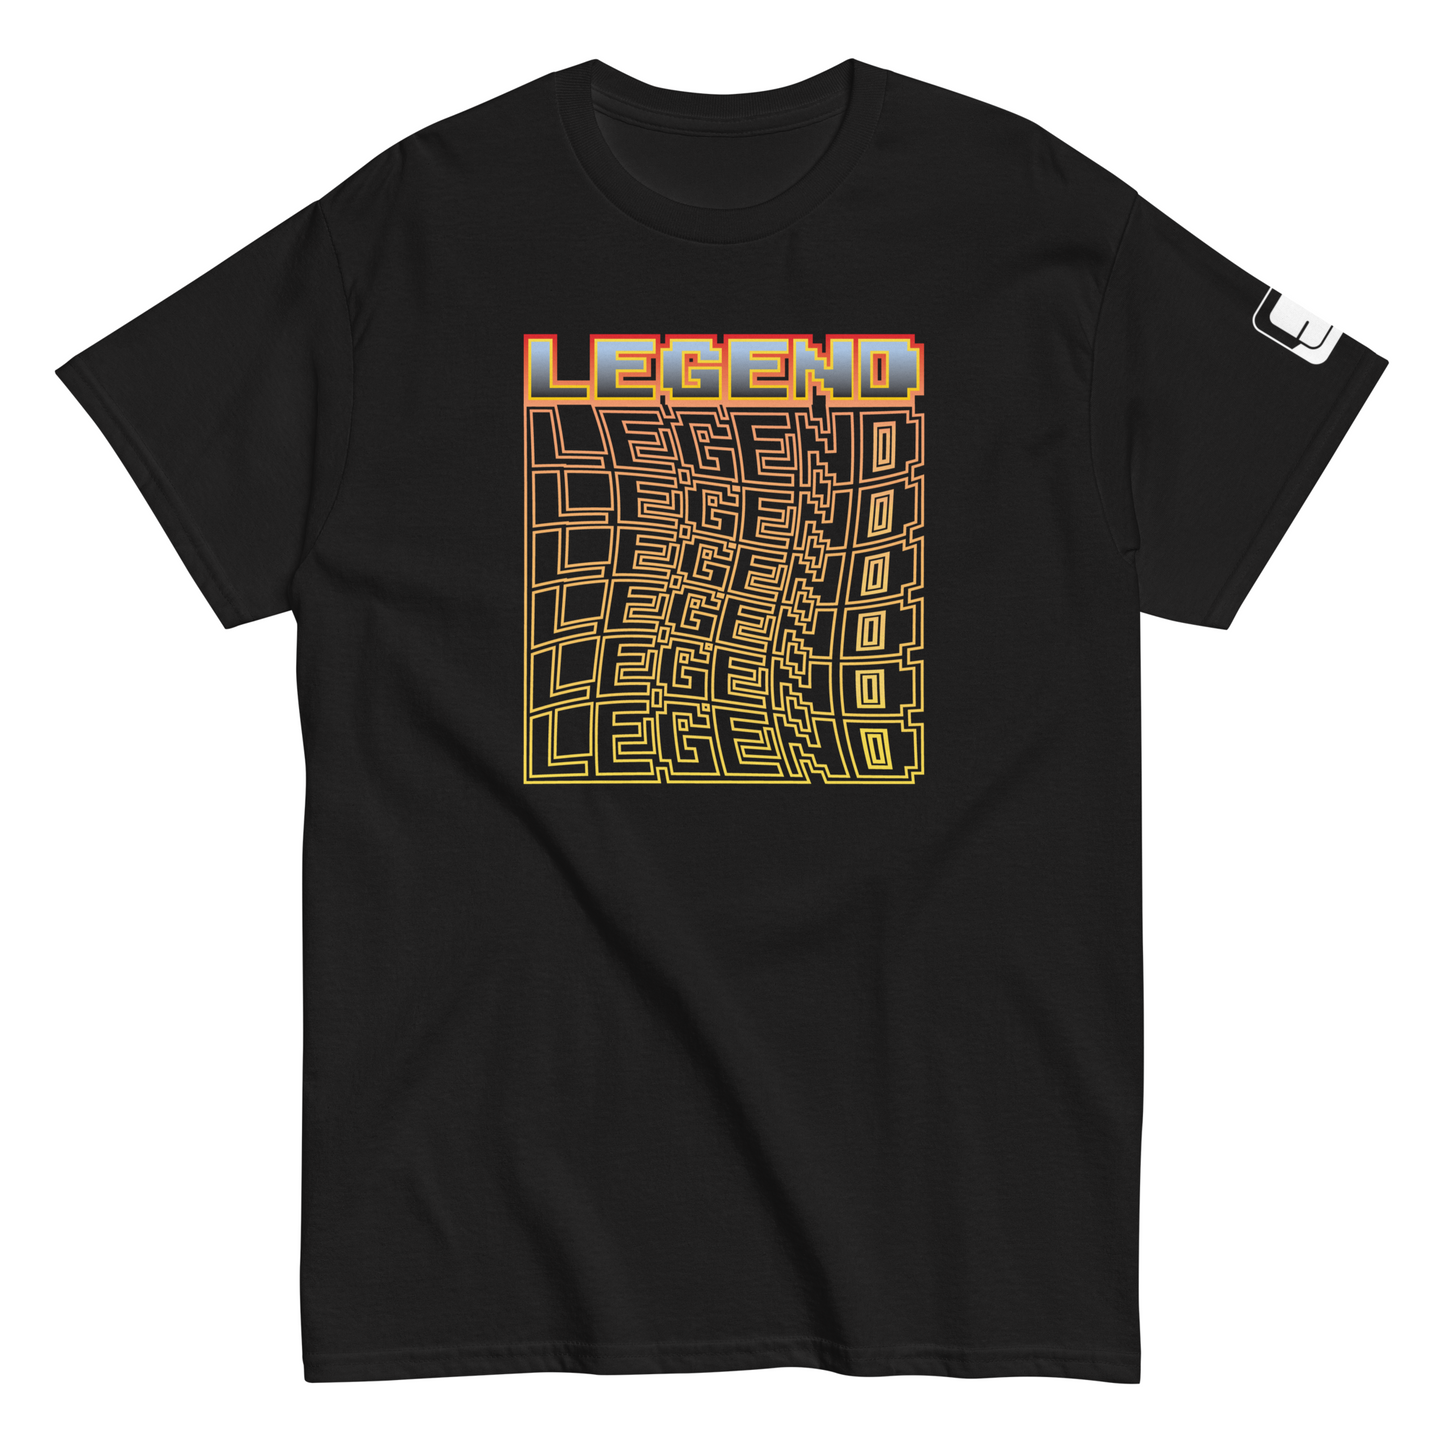 Black t-shirt featuring 'LEGEND' in a pixelated font that has a 3D design, against a white background.